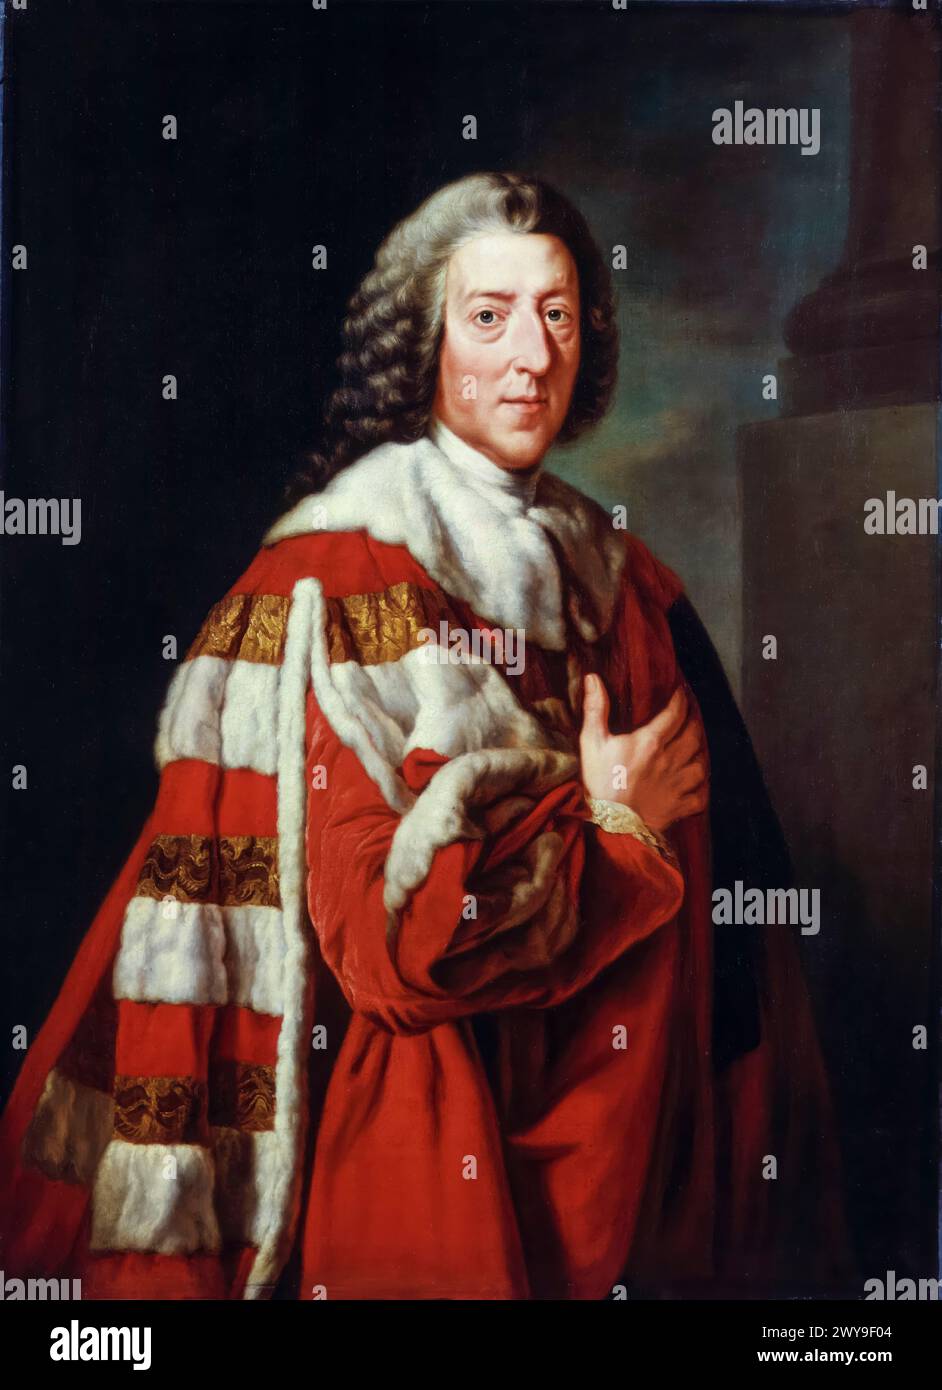 William Pitt the Elder, 1st Earl of Chatham (1708-1778), Whig politician and Prime Minister of Great Britain 1766-1768, portrait painting in oil on canvas after Richard Brompton, 1772 Stock Photo